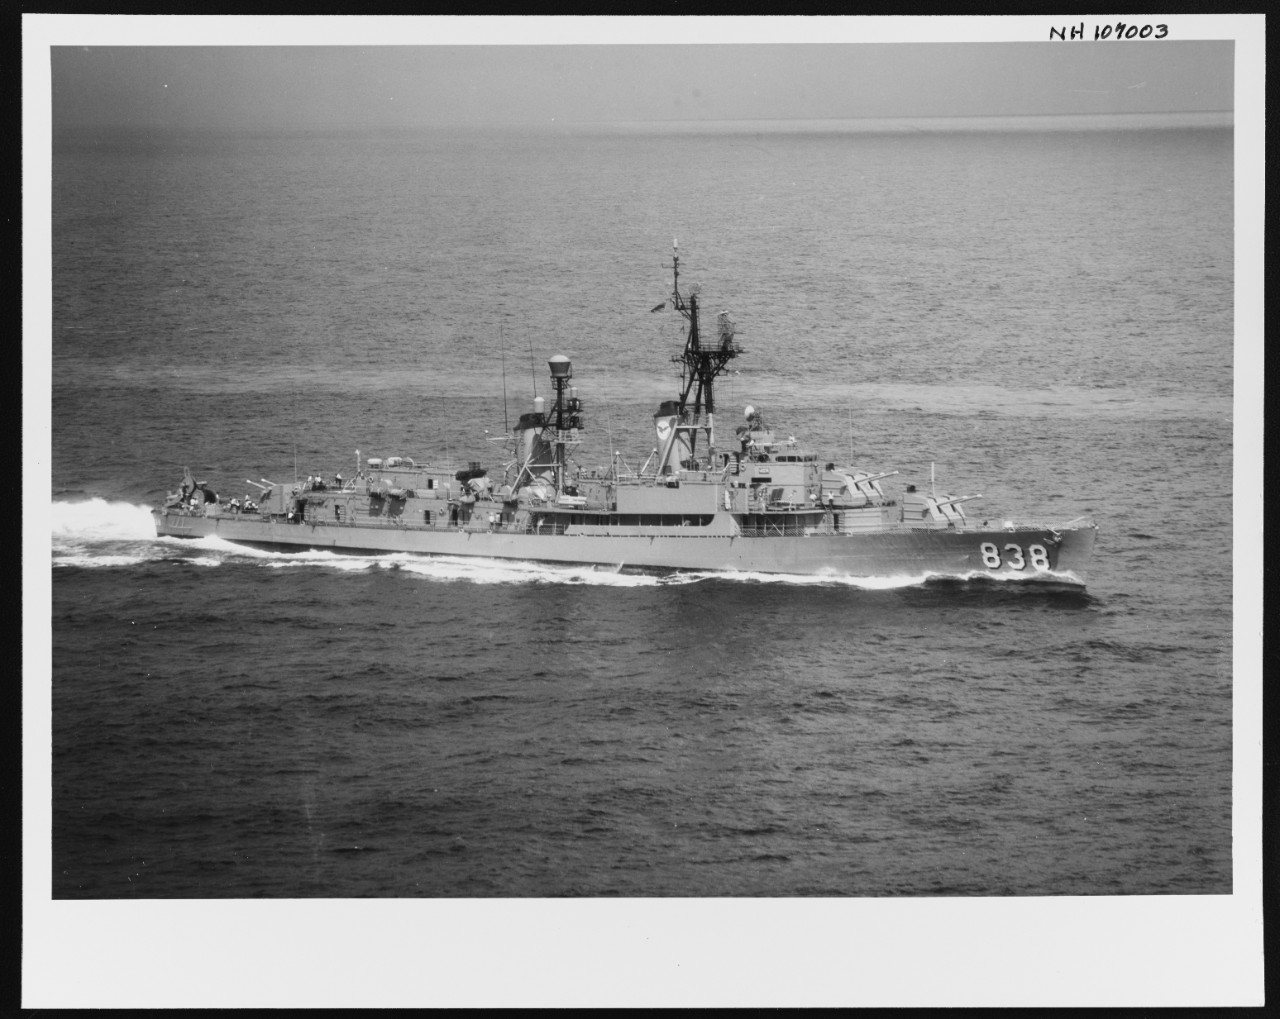 Photo #: NH 107003  USS Ernest G. Small